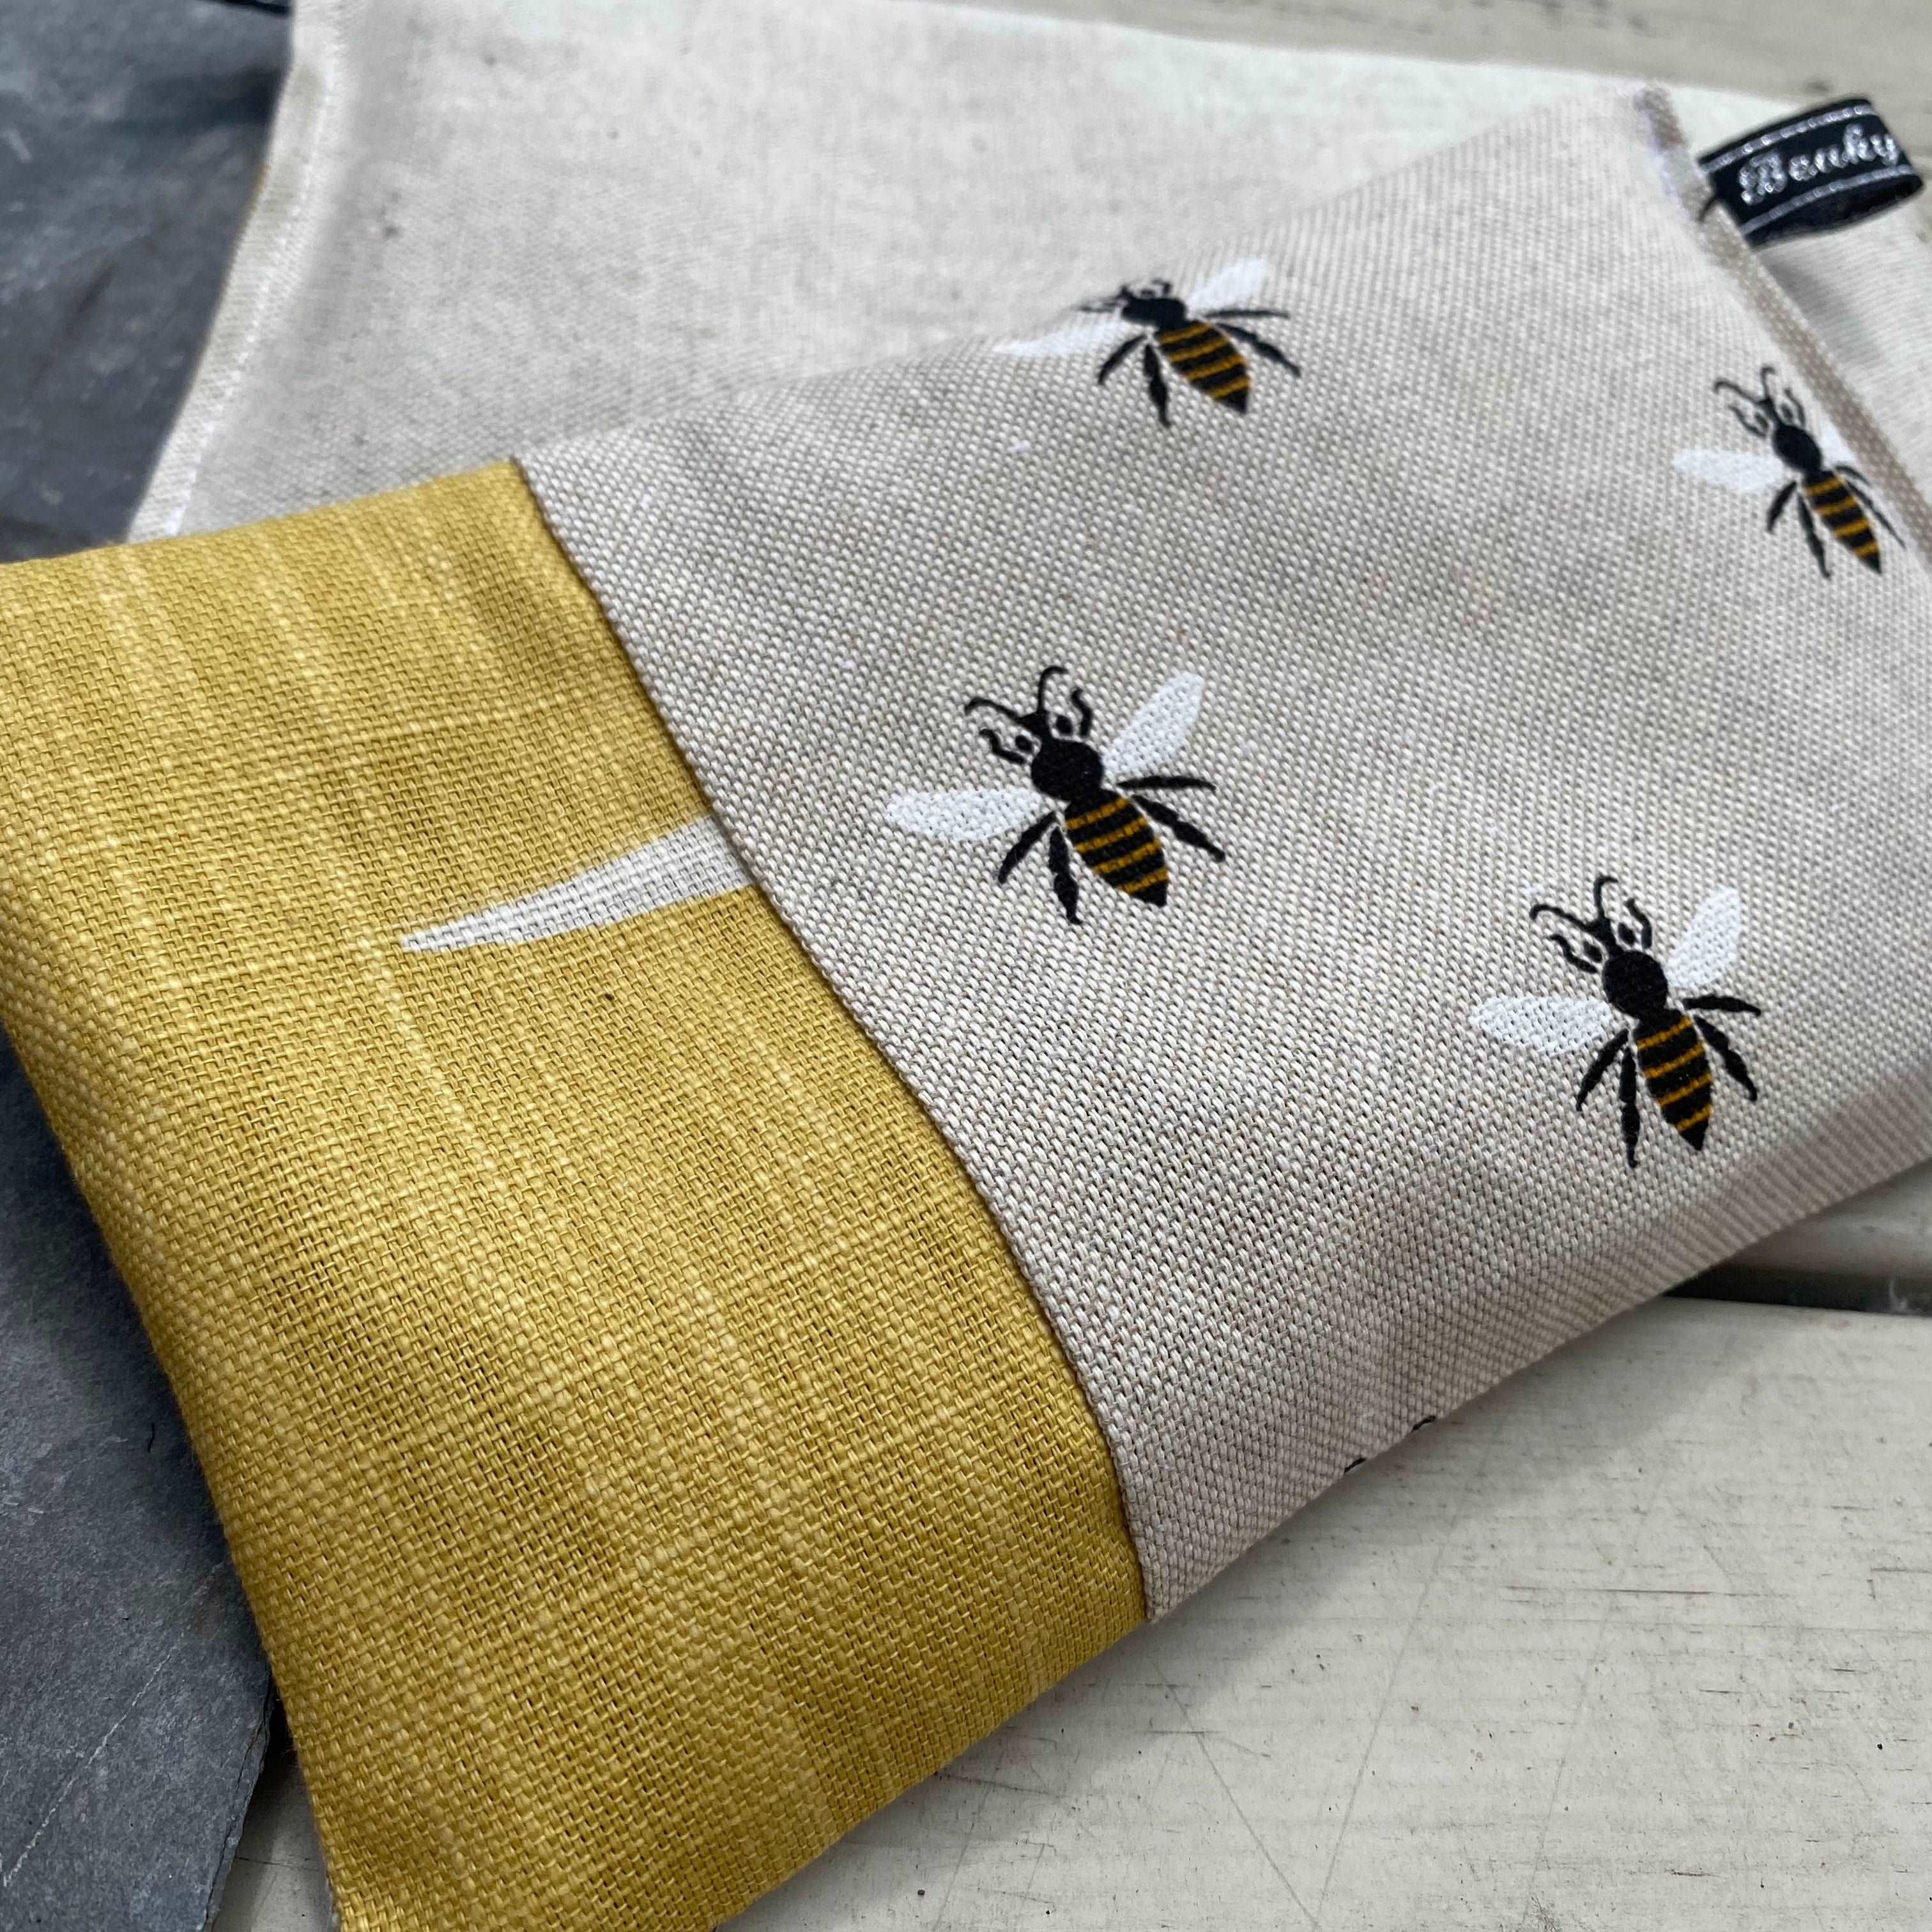 Bee Sleep Pillow - Lavender and Hops By Beaky Leicestershire 